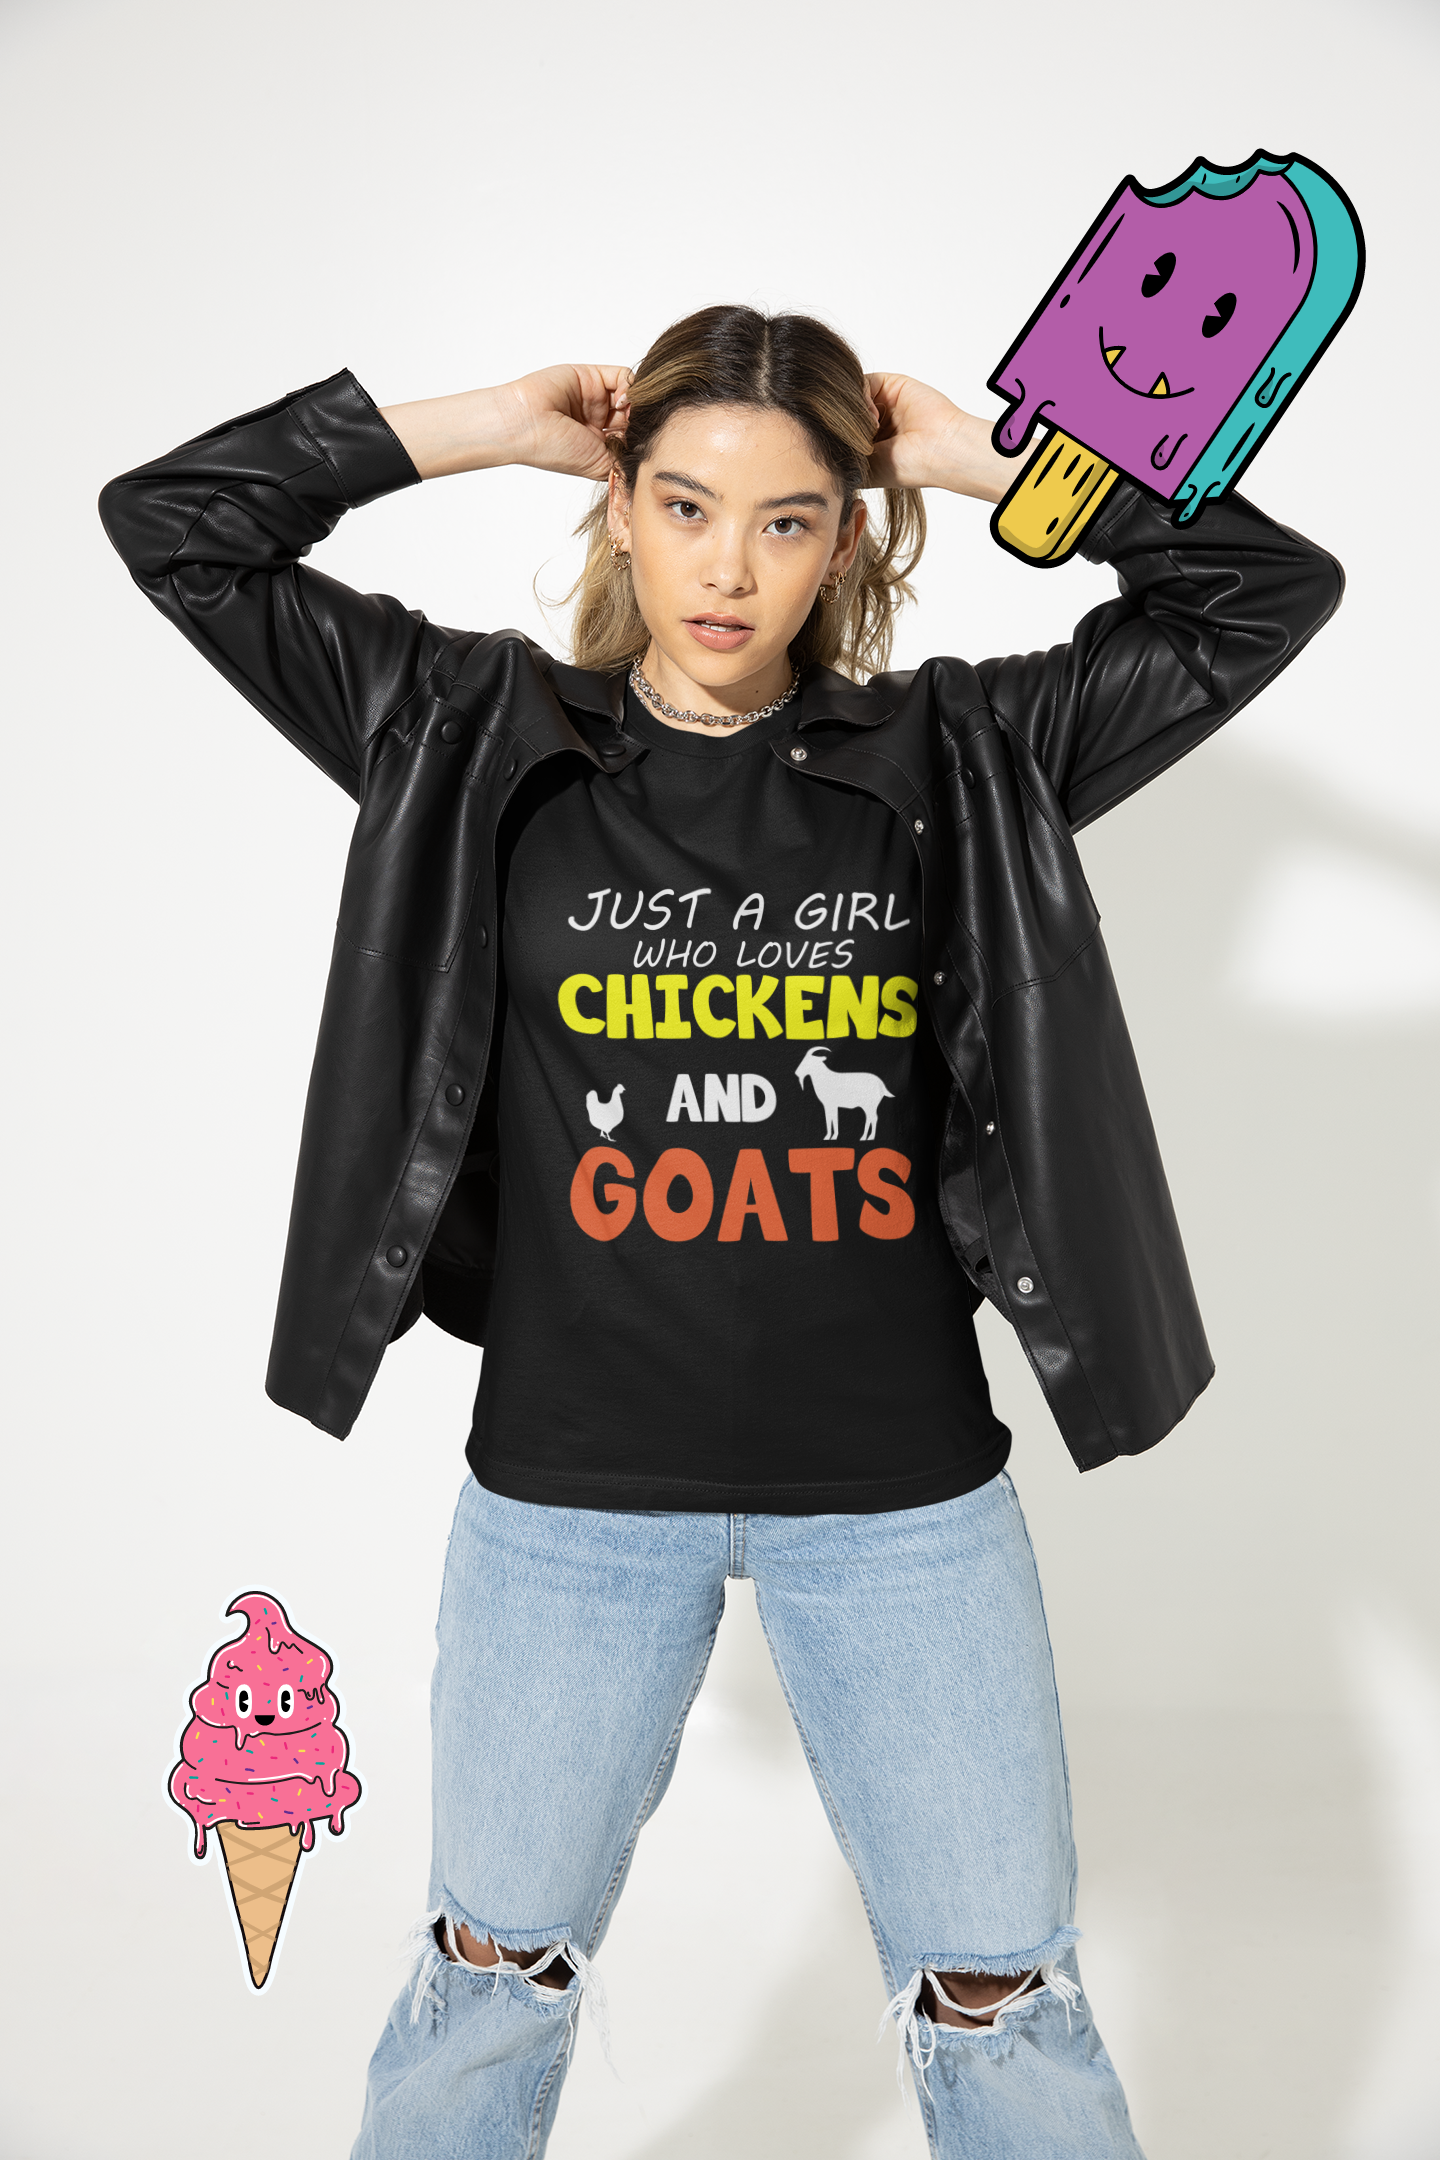 chicken goat farmer just a girl who loves chickens and goats short sleeve t shirt